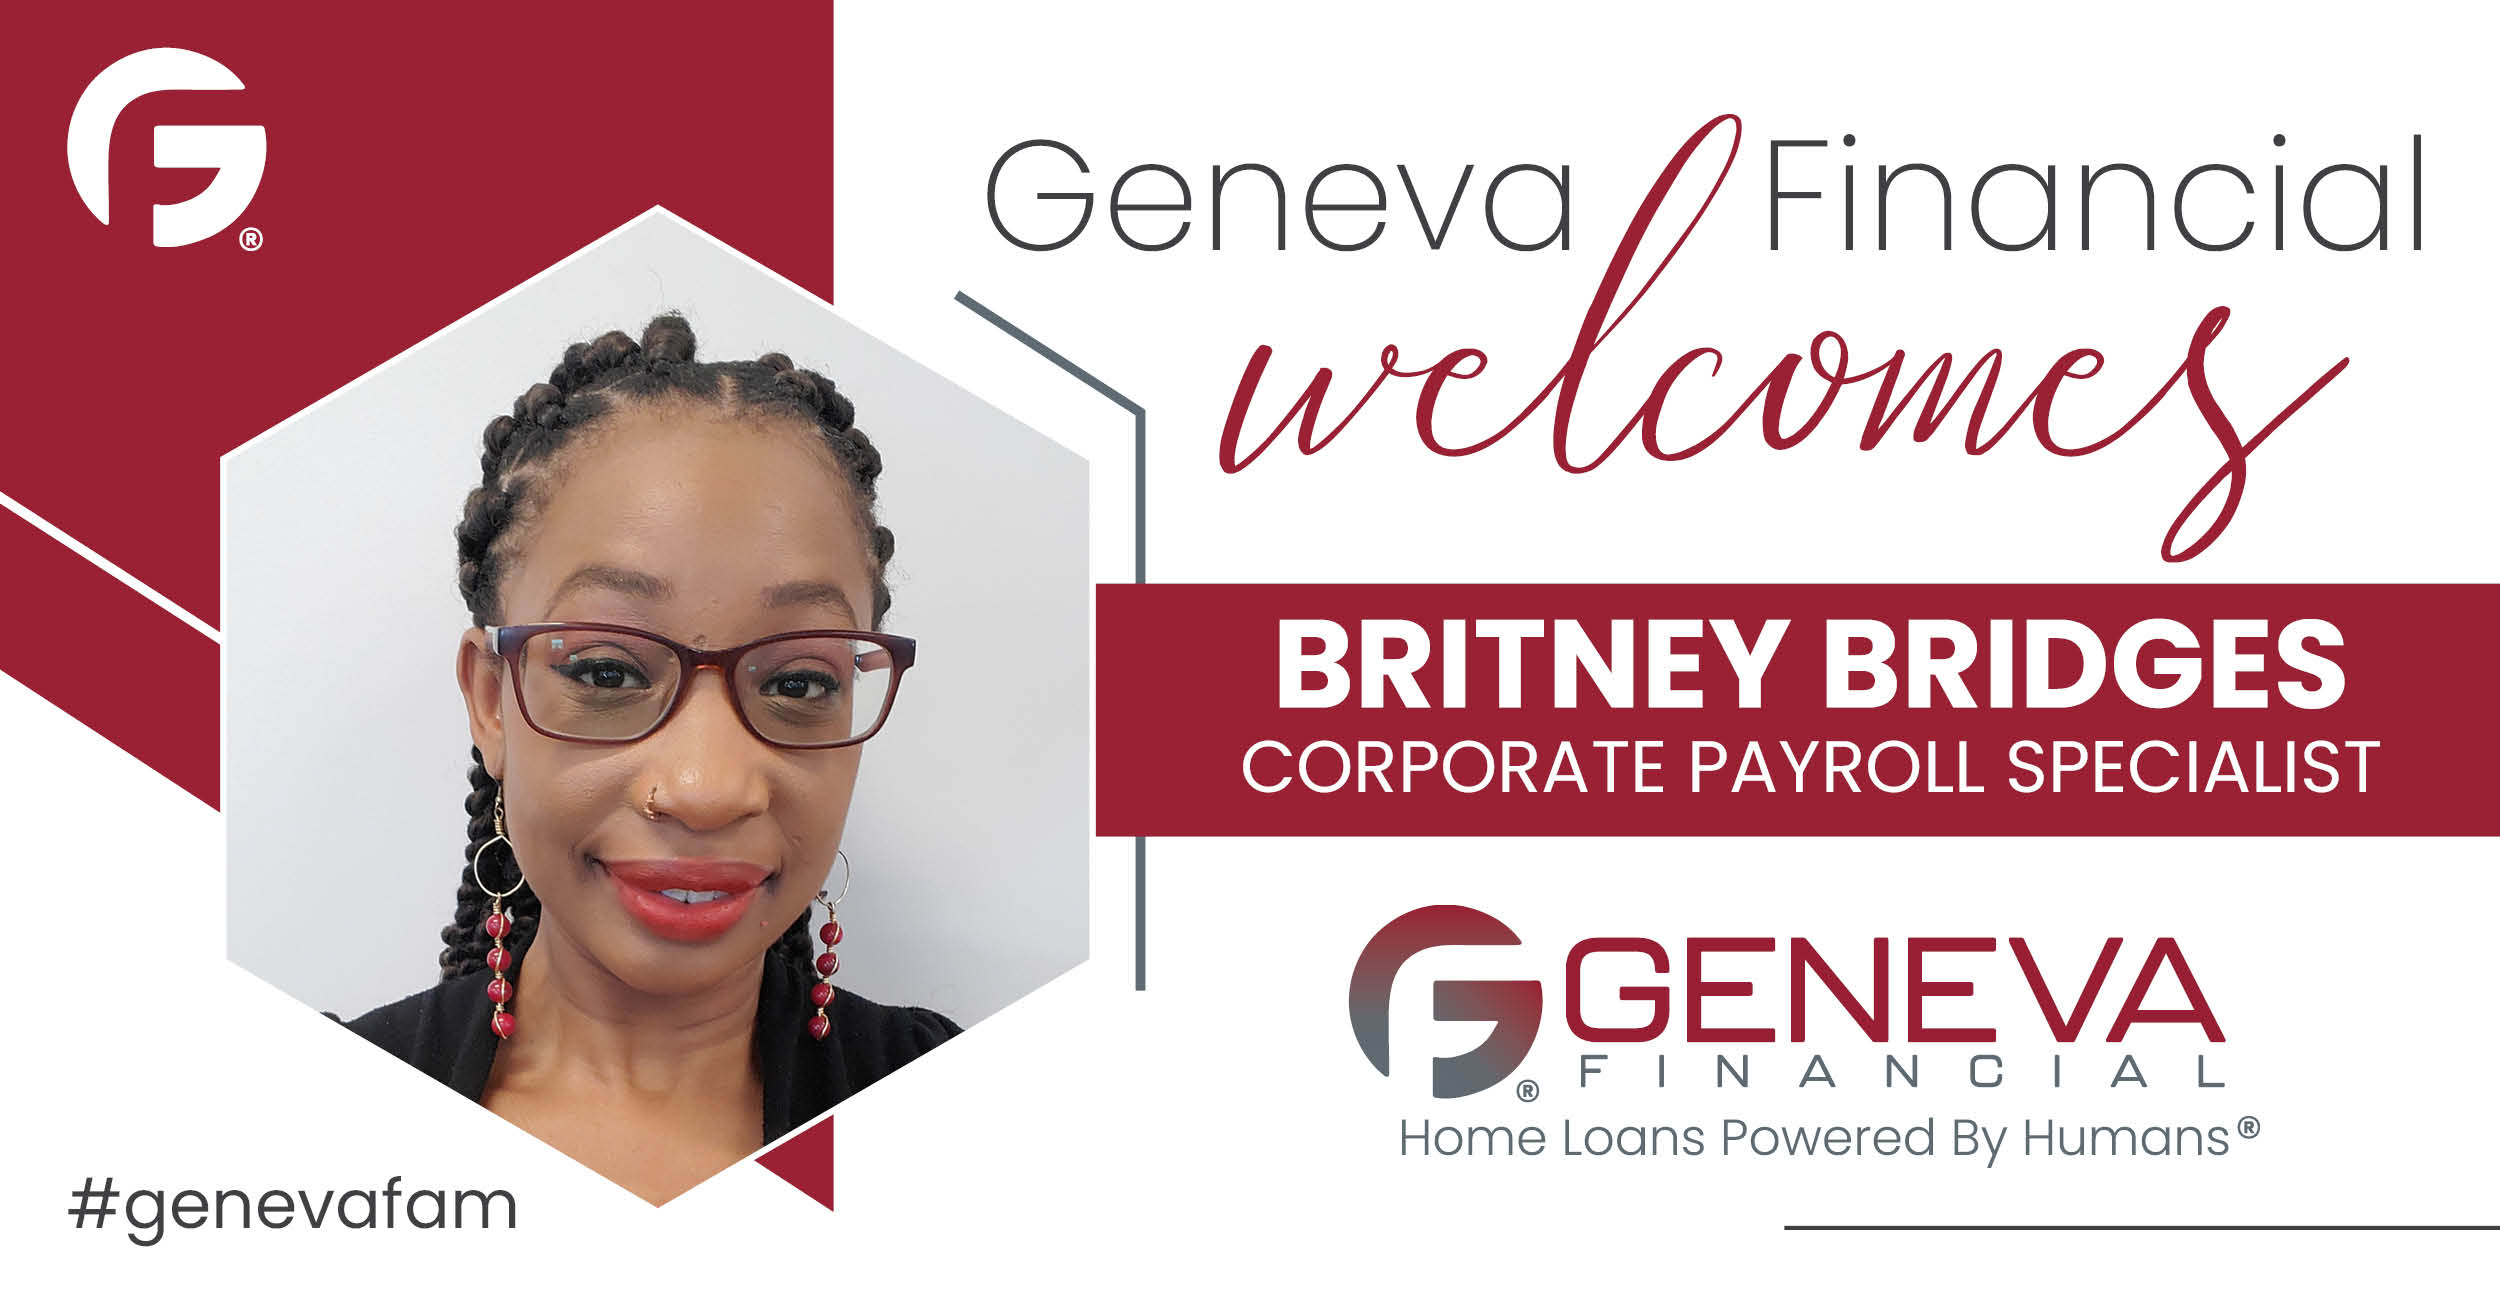 Geneva Financial Welcomes New Payroll Specialist Britney Bridges to Geneva Corporate – Home Loans Powered by Humans®.